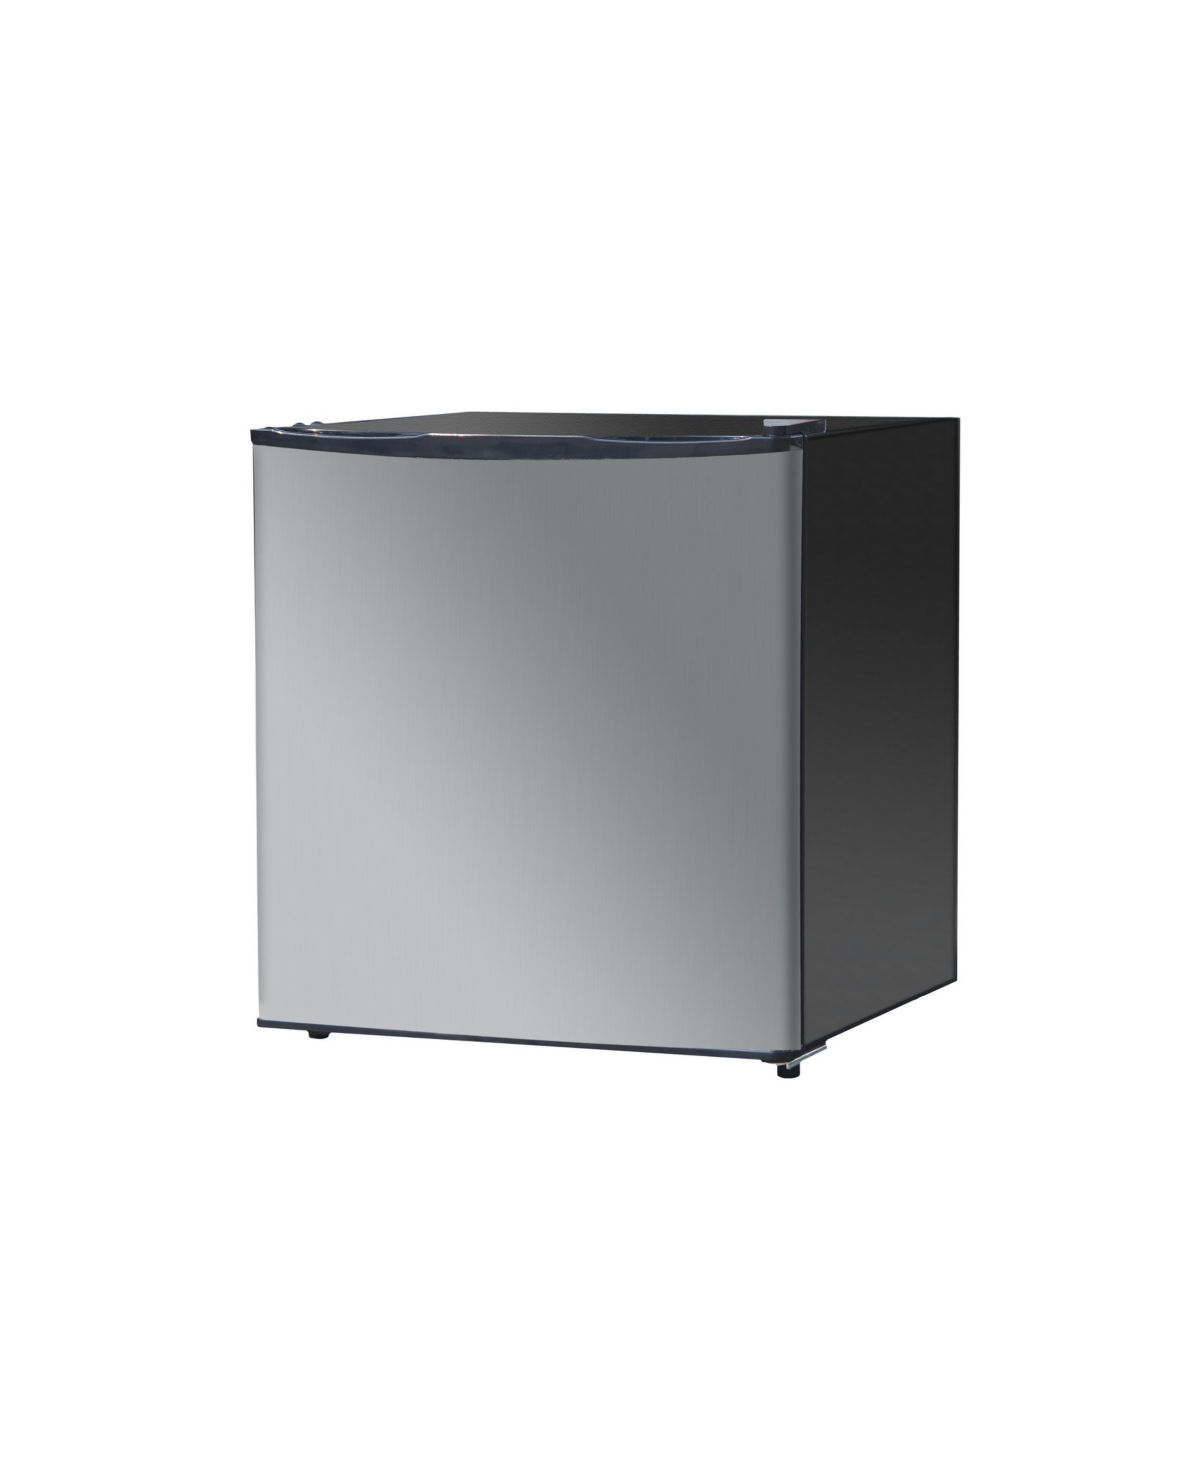 Spt 1.72 Cubic feet Compact Refrigerator, Stainless Steel/Black